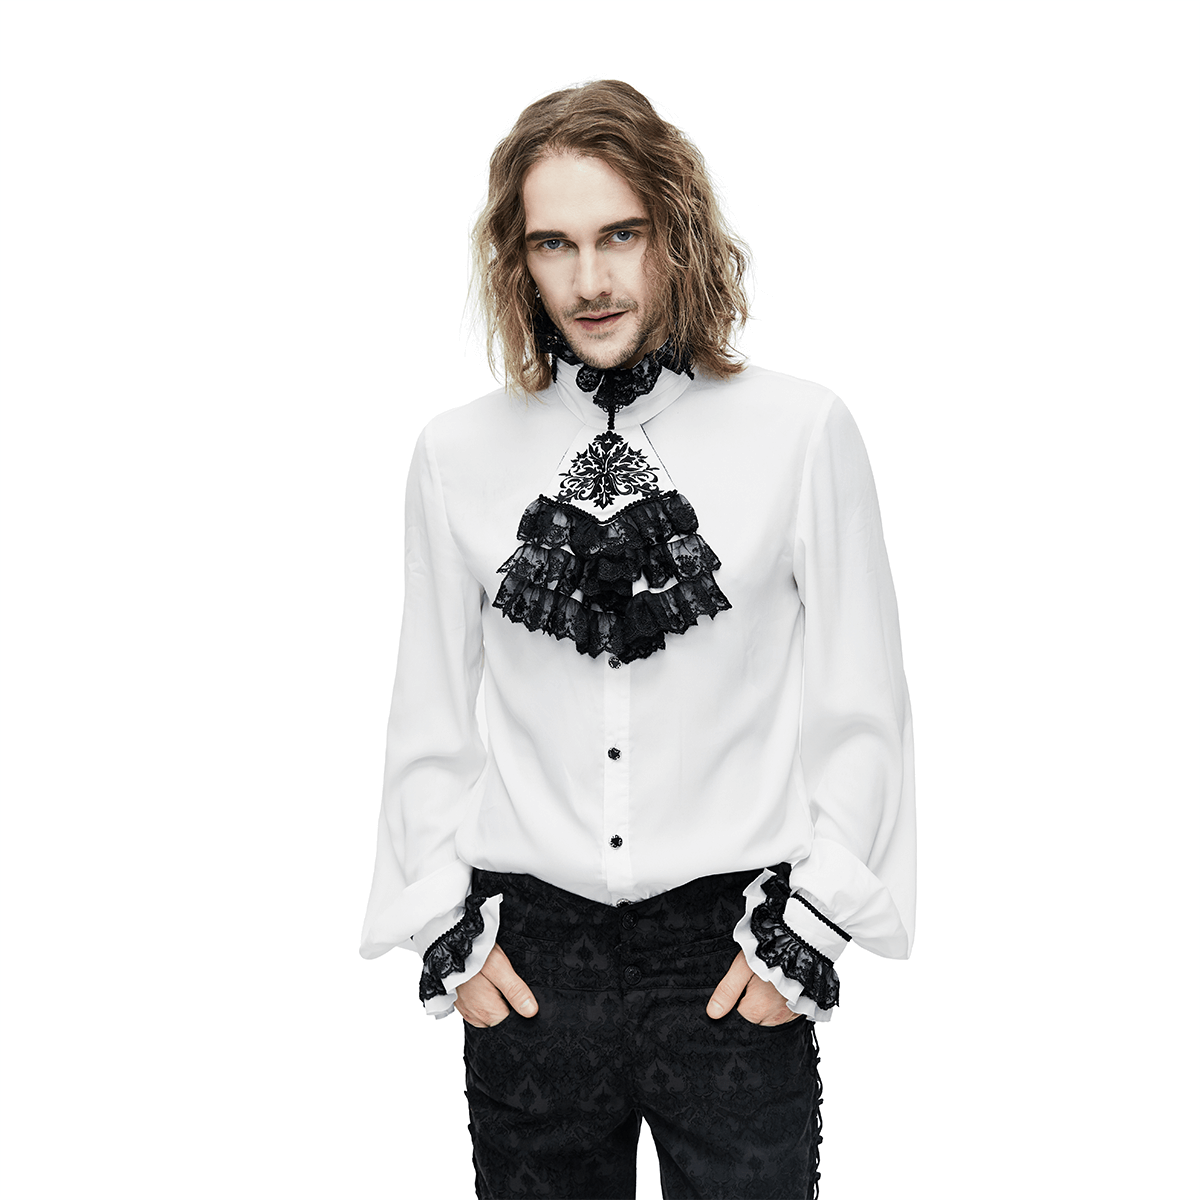 Elegant Men's Shirt with Chiffon Black Tie / Gothic Long Sleeve Shirt with Stand-Collar - HARD'N'HEAVY